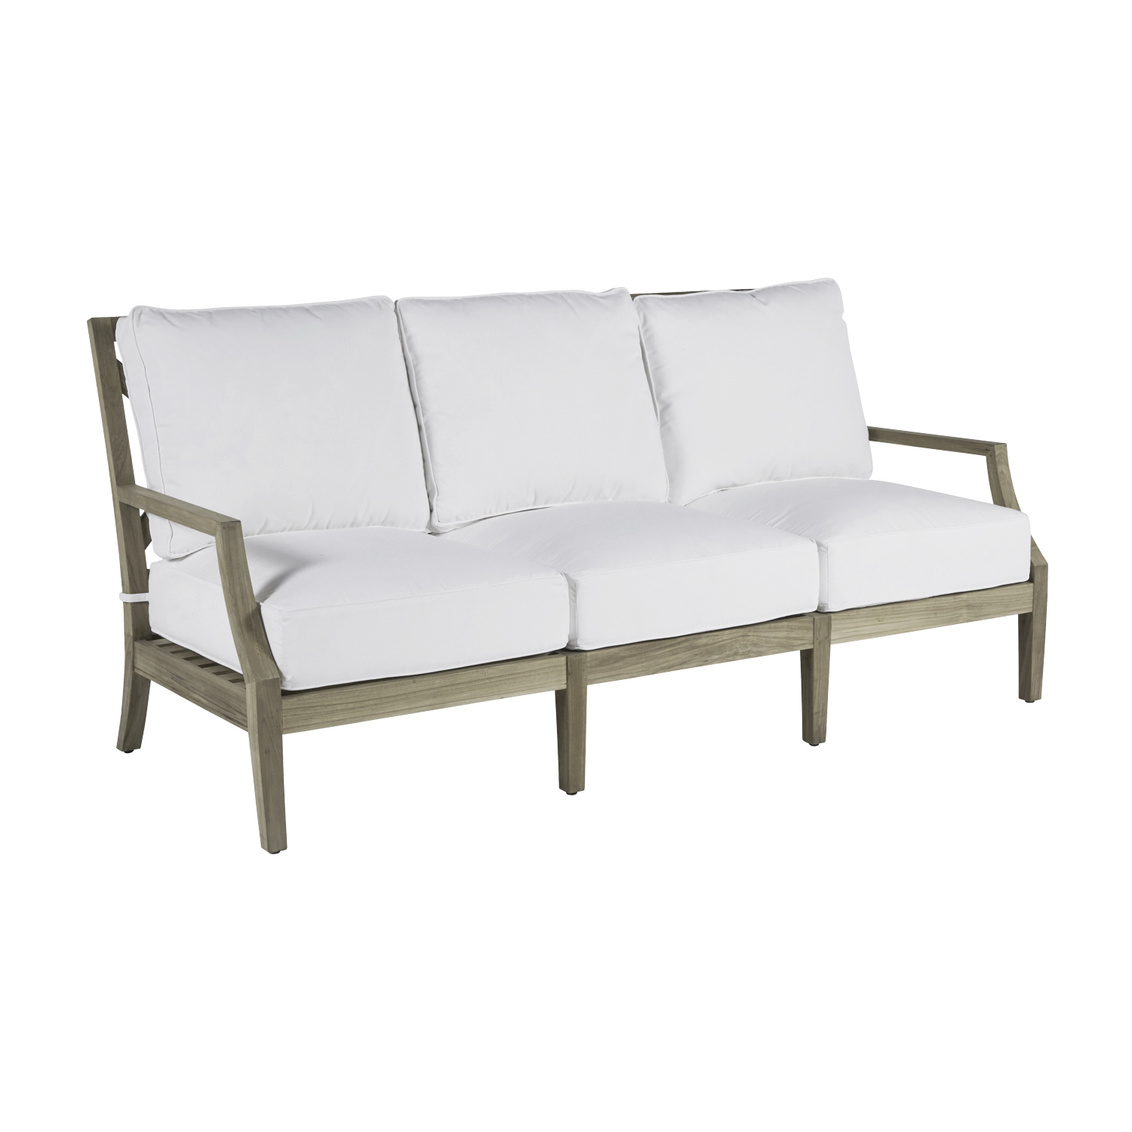 haley sofa in oyster teak – frame only product image